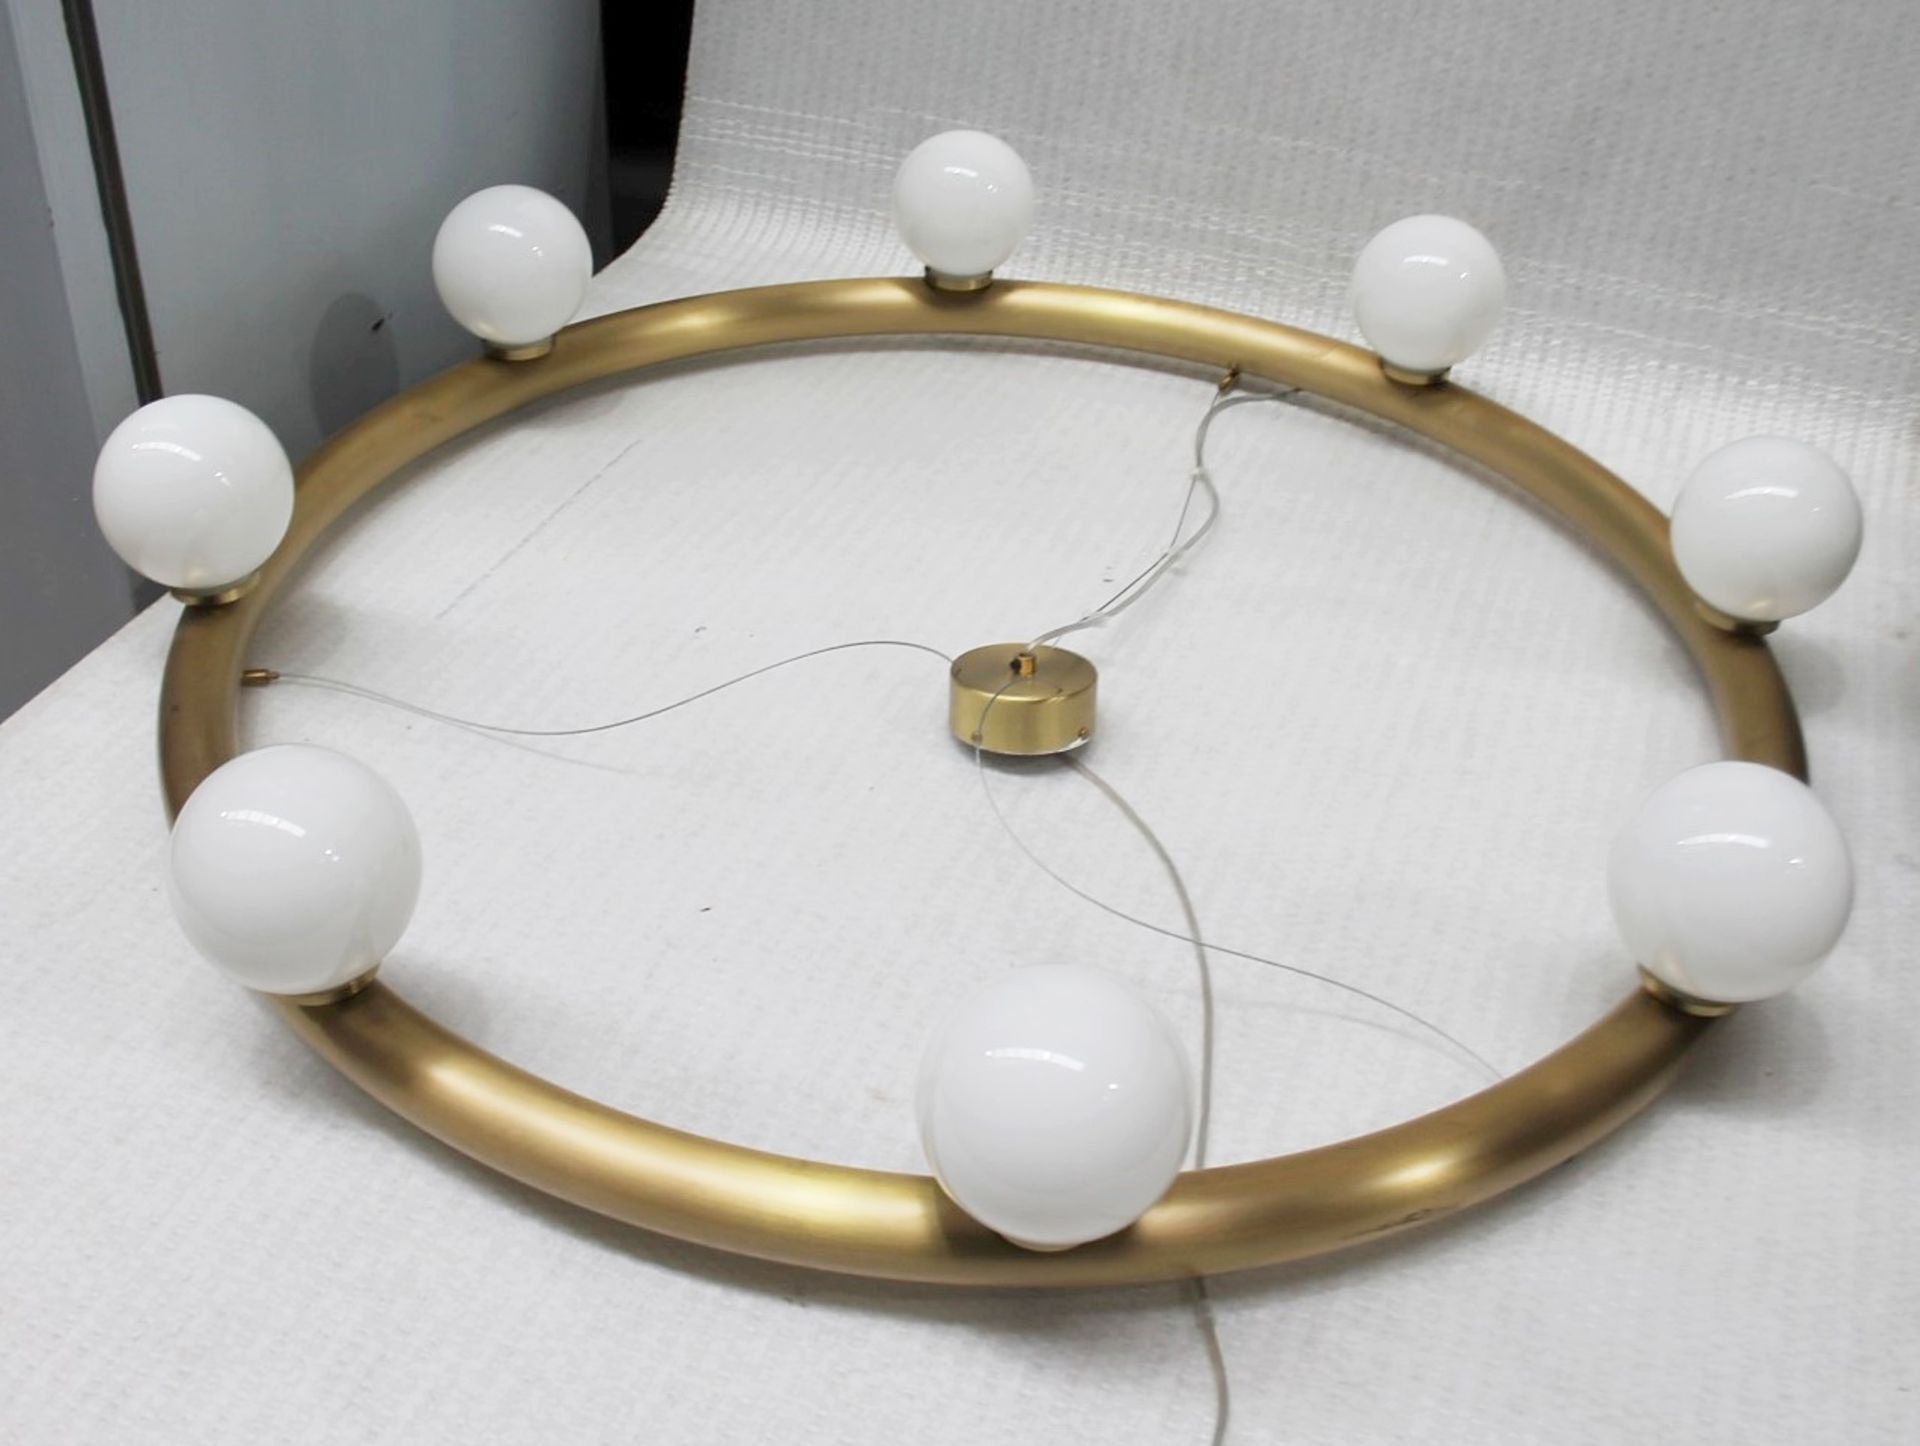 1 x Huge Luxury Statement Circular 8-Light Chandelier In Brass With Opal Shades - Price £3,540 - Image 9 of 10